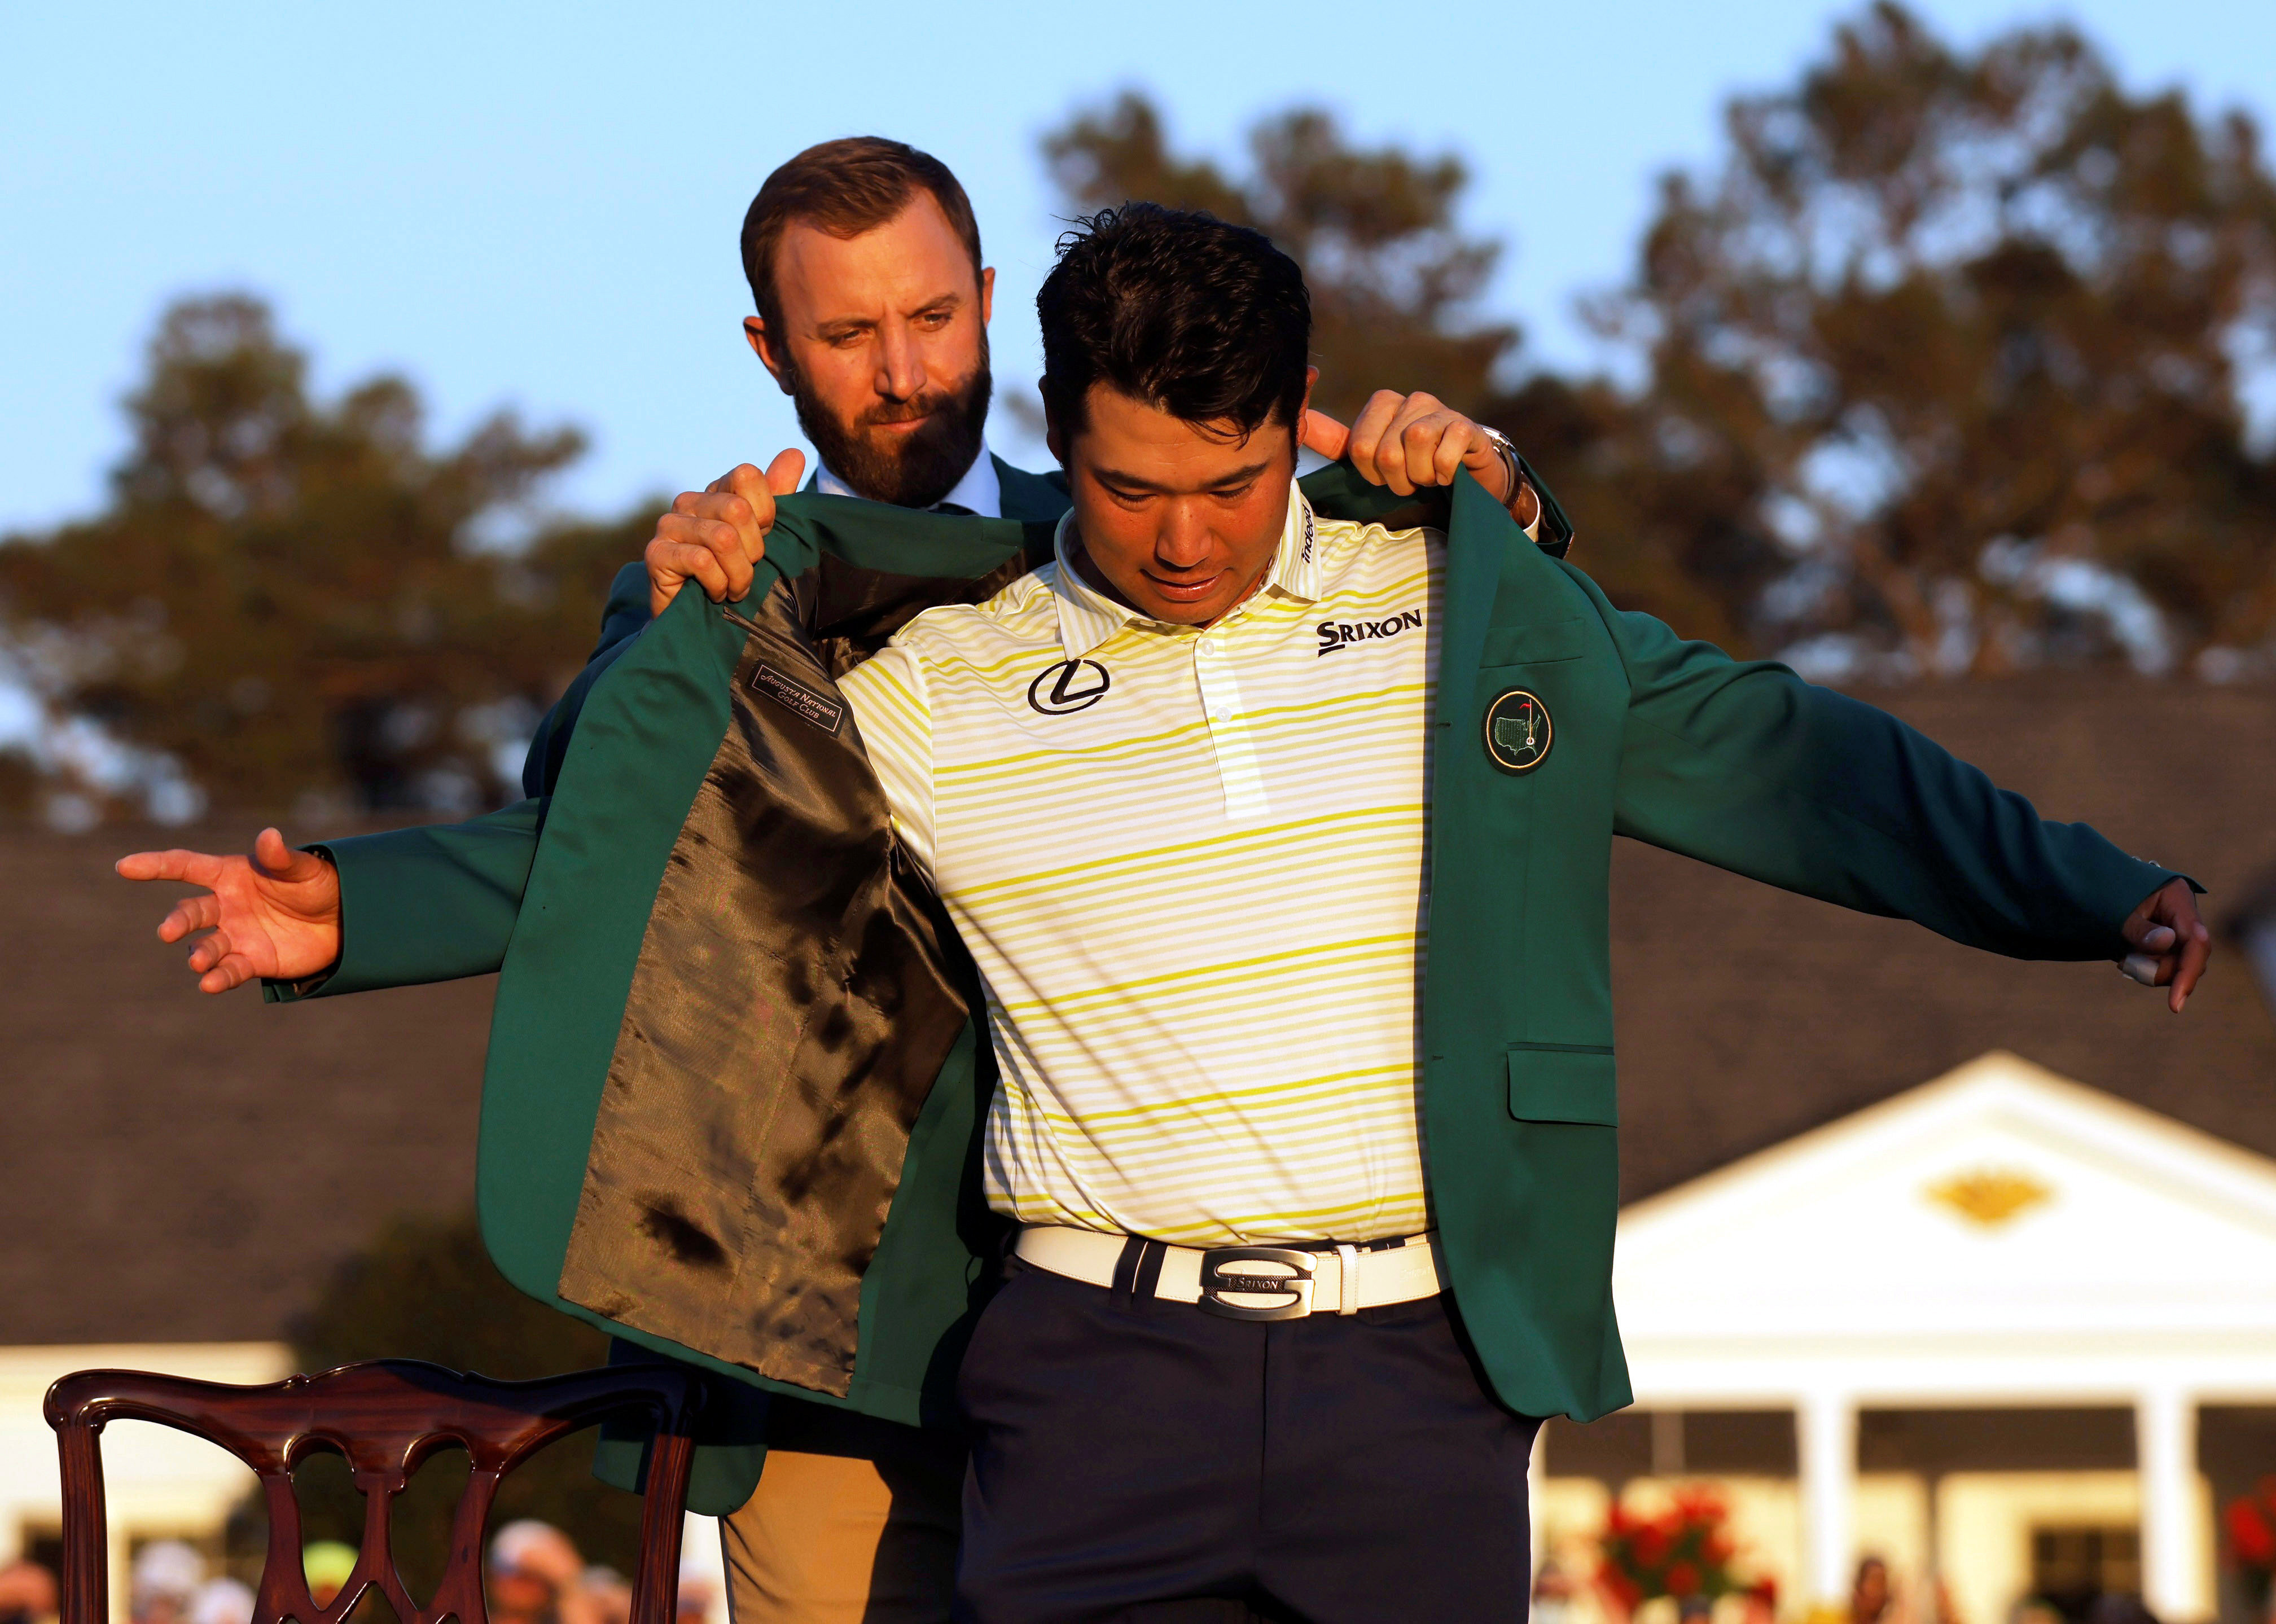 Hideki Matsuyama is presented with the green jacket by Dustin Johnson after winning The Masters in 2021. Photo: Reuters